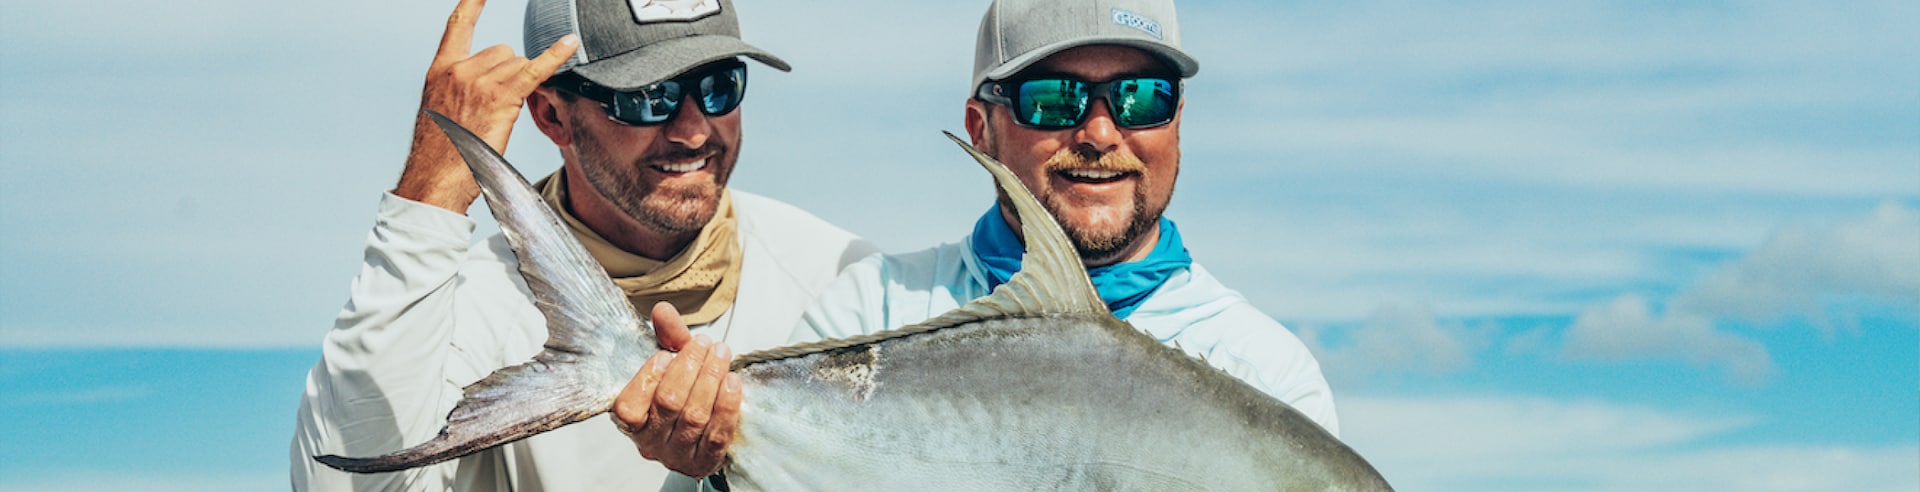 What Makes Costa Sunglasses So Good For Fishing?